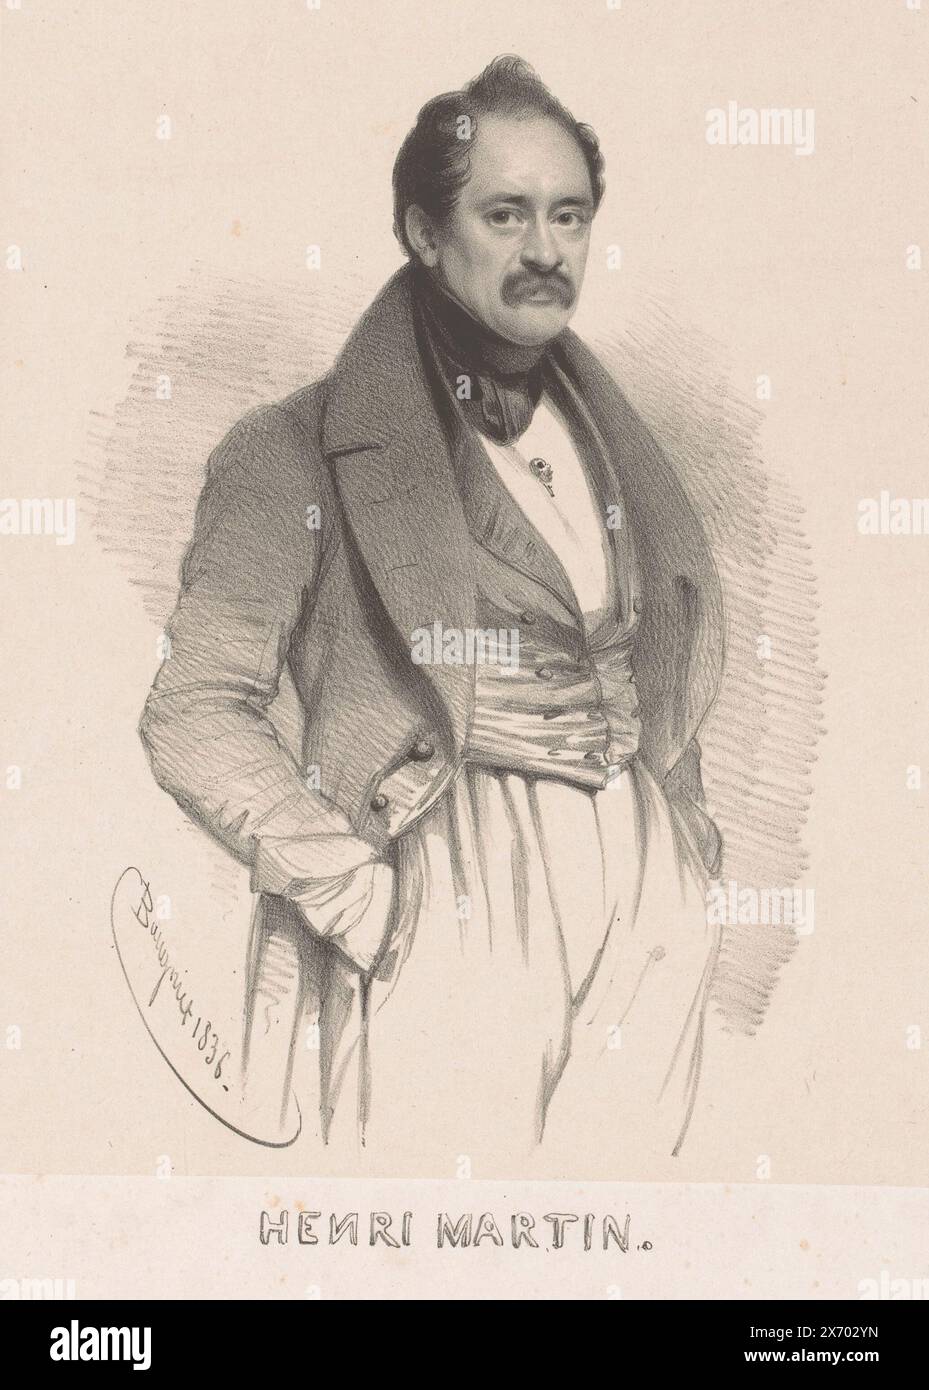 Portrait of Henri Martin, Henri Martin (title on object), print, print maker: Charles Baugniet, (mentioned on object), 1836, paper, height, 362 mm × width, 270 mm Stock Photo